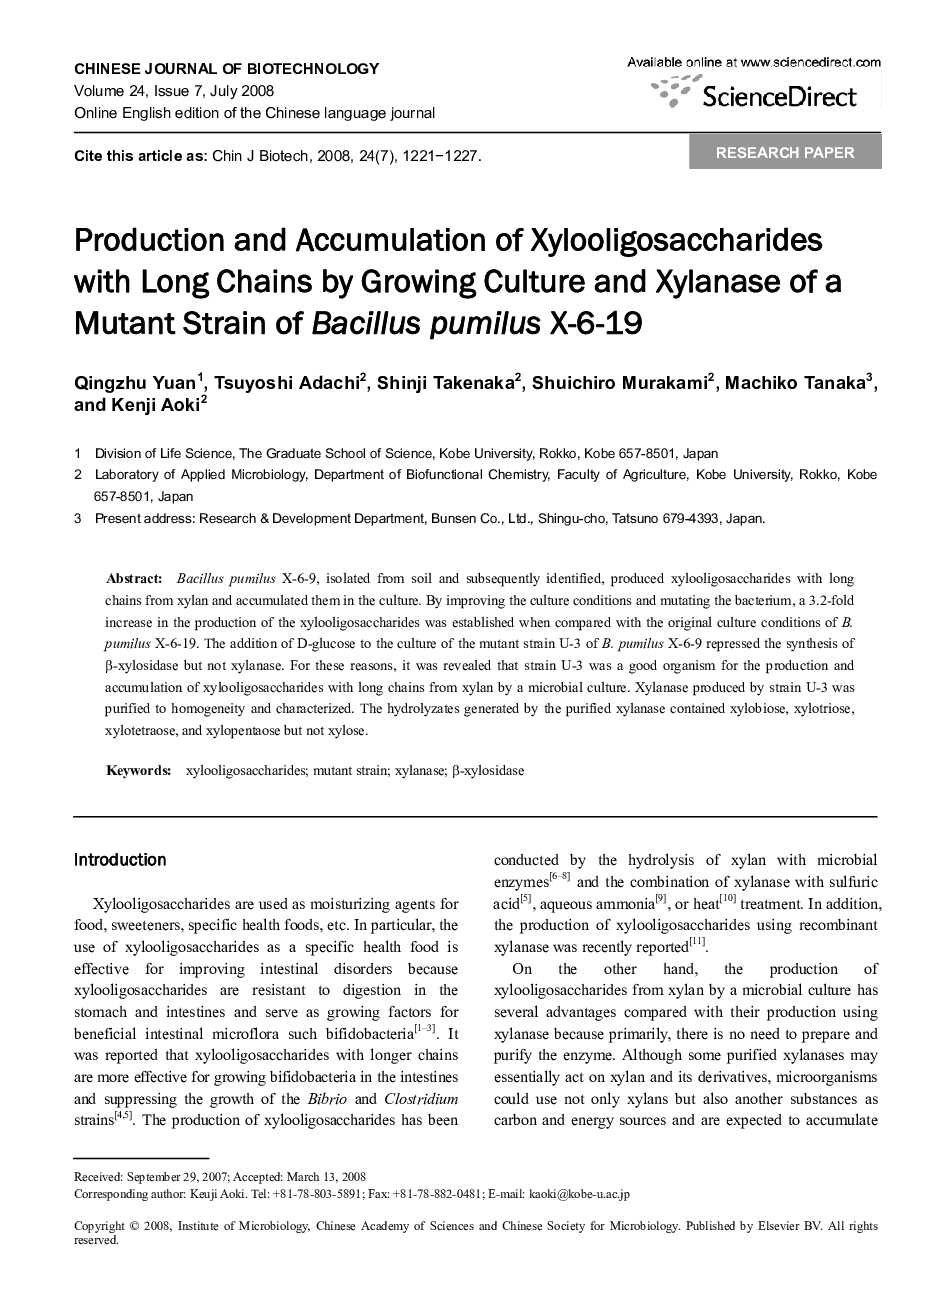 Production and Accumulation of Xylooligosaccharides with Long Chains by Growing Culture and Xylanase of a Mutant Strain of Bacillus pumilus X-6-19